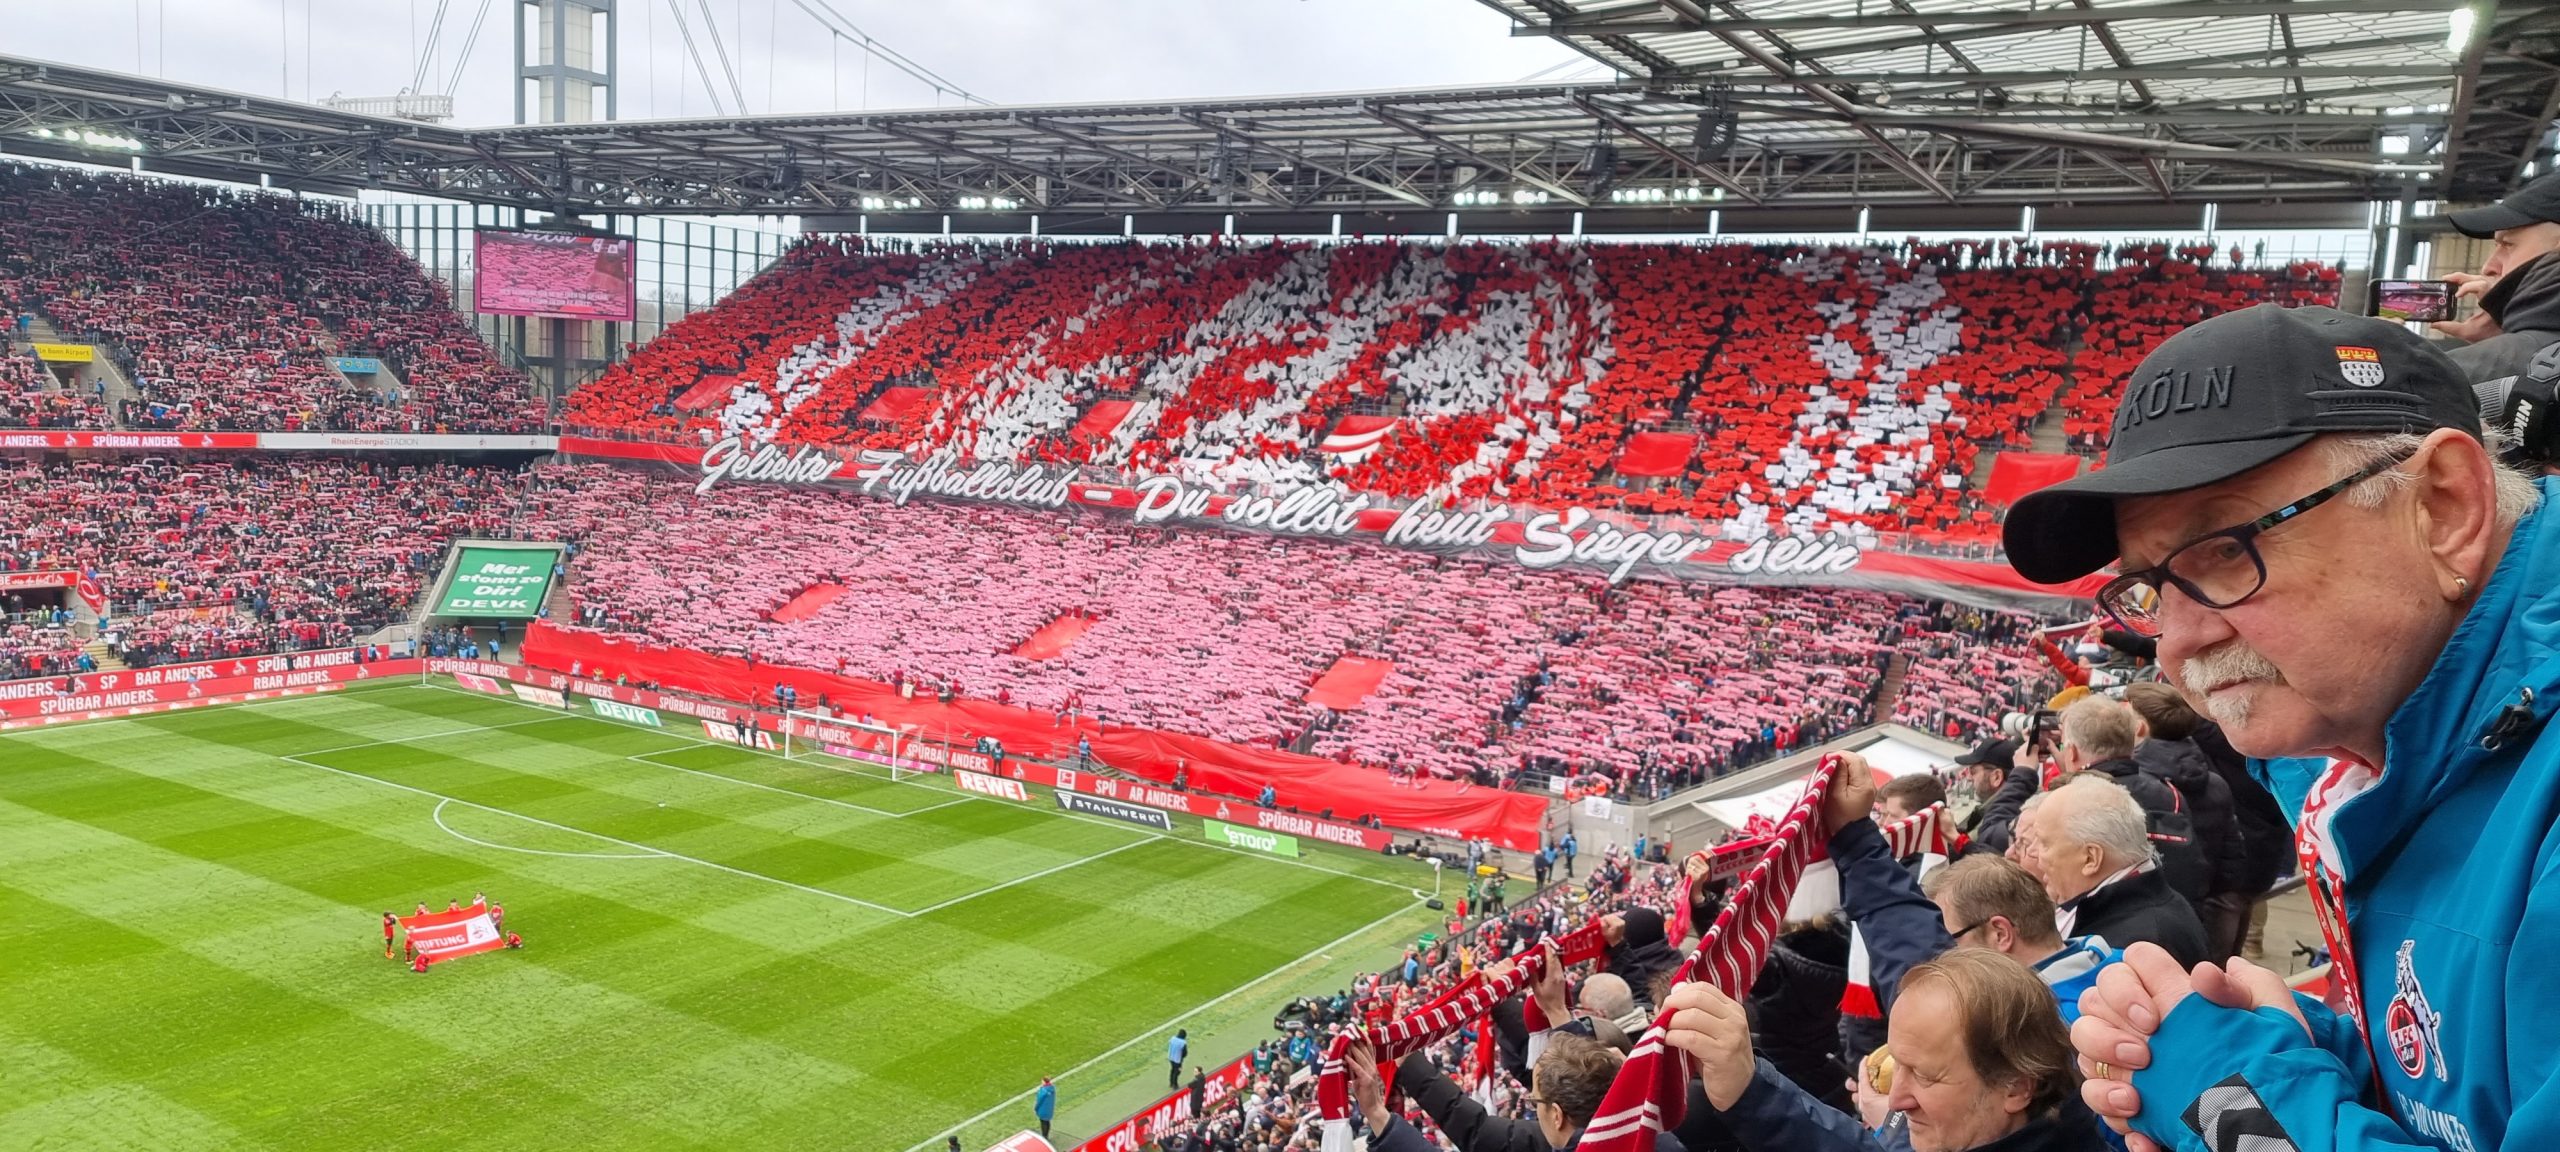 You are currently viewing Tolle Stimmung beim Lokalderby in Köln